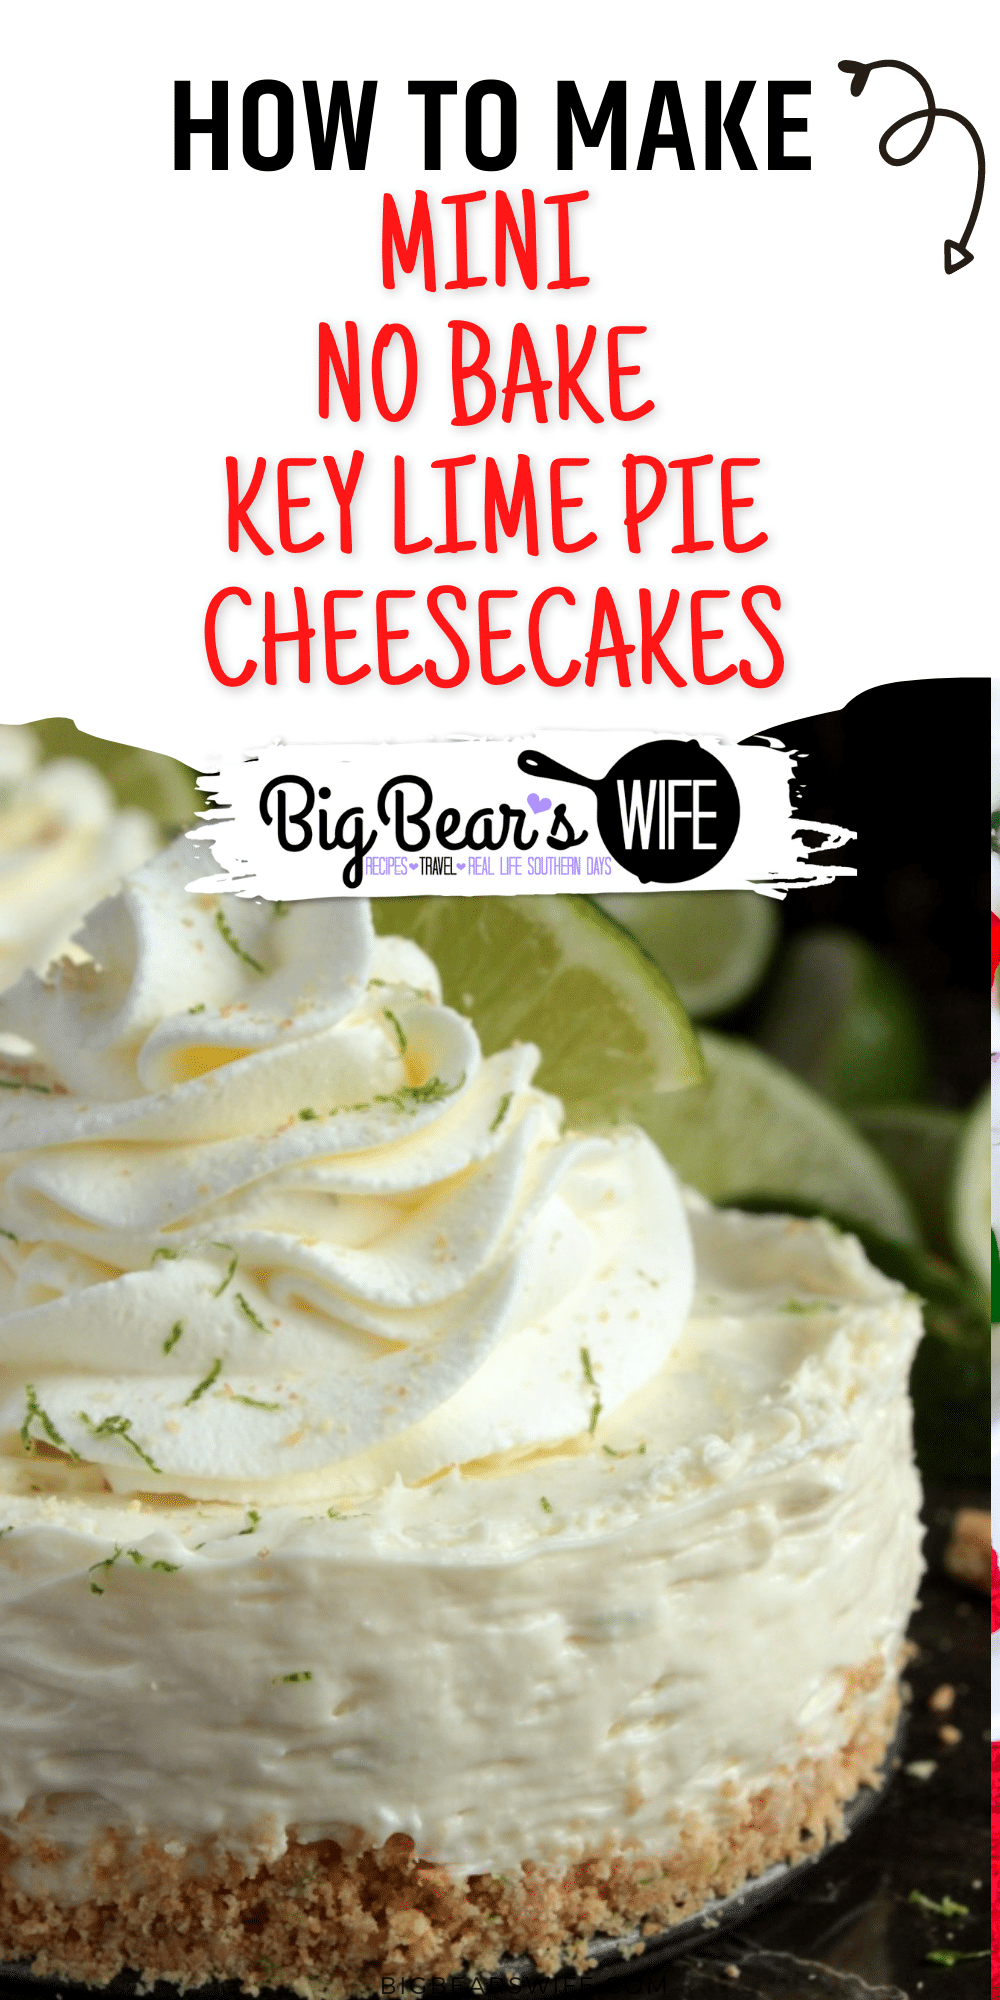 Mini No Bake Key Lime Pie Cheesecakes – easy little no bake cheesecakes with a graham cracker and lime zest crust that’s been filled with a tasty key lime cheesecake filling and topped with homemade whipped cream.

 via @bigbearswife